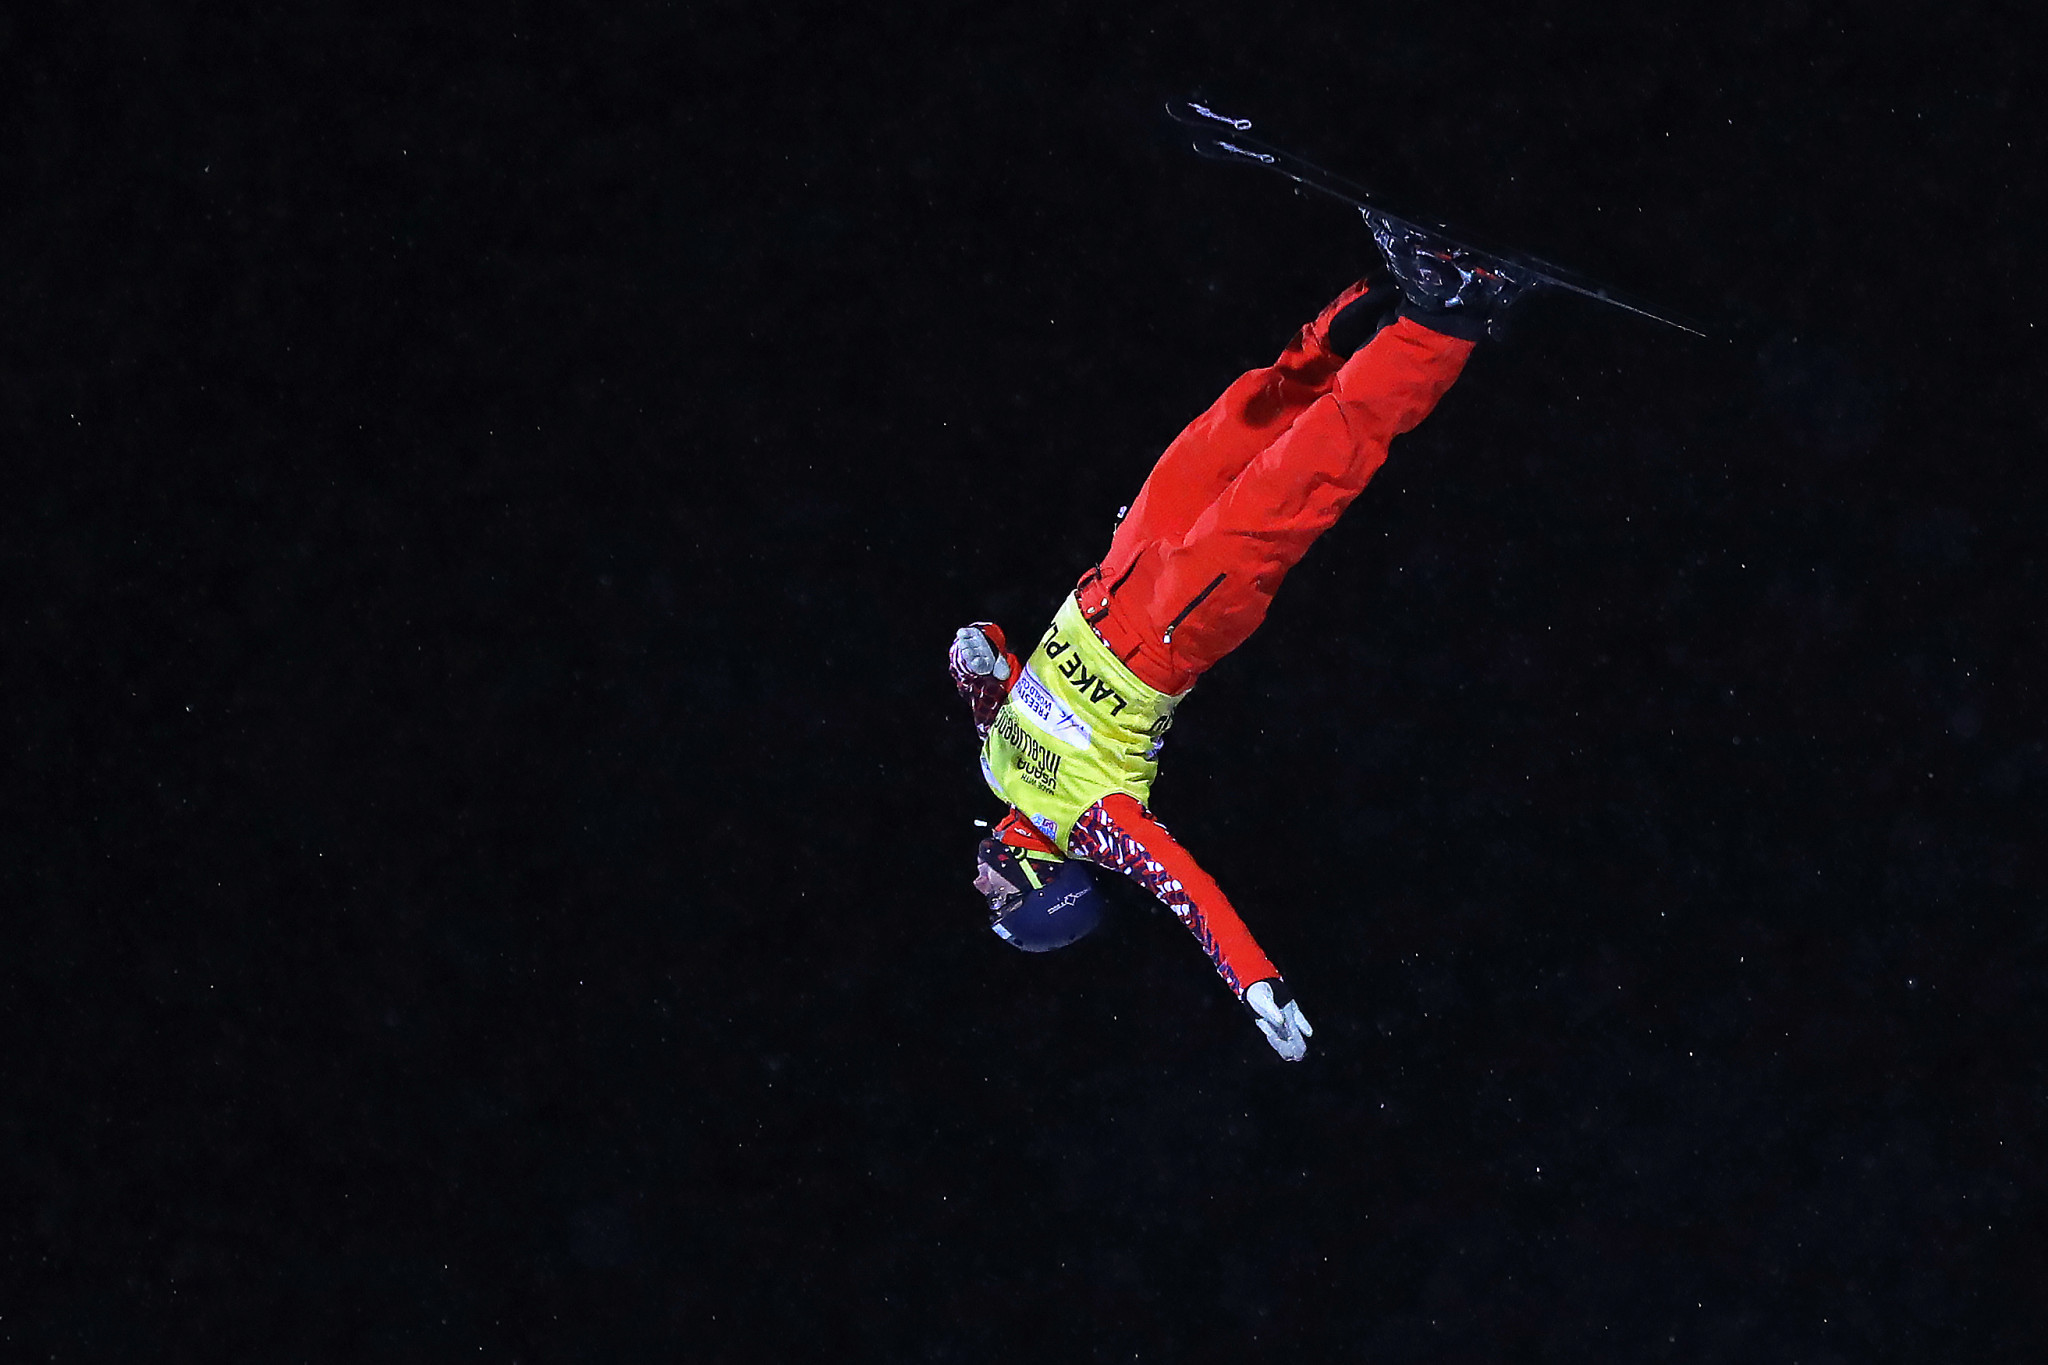 Russia's Maxim Burov is set to be among the freestyle skiing stars at the Aerials World Cup event in Yaroslavl ©Getty Images